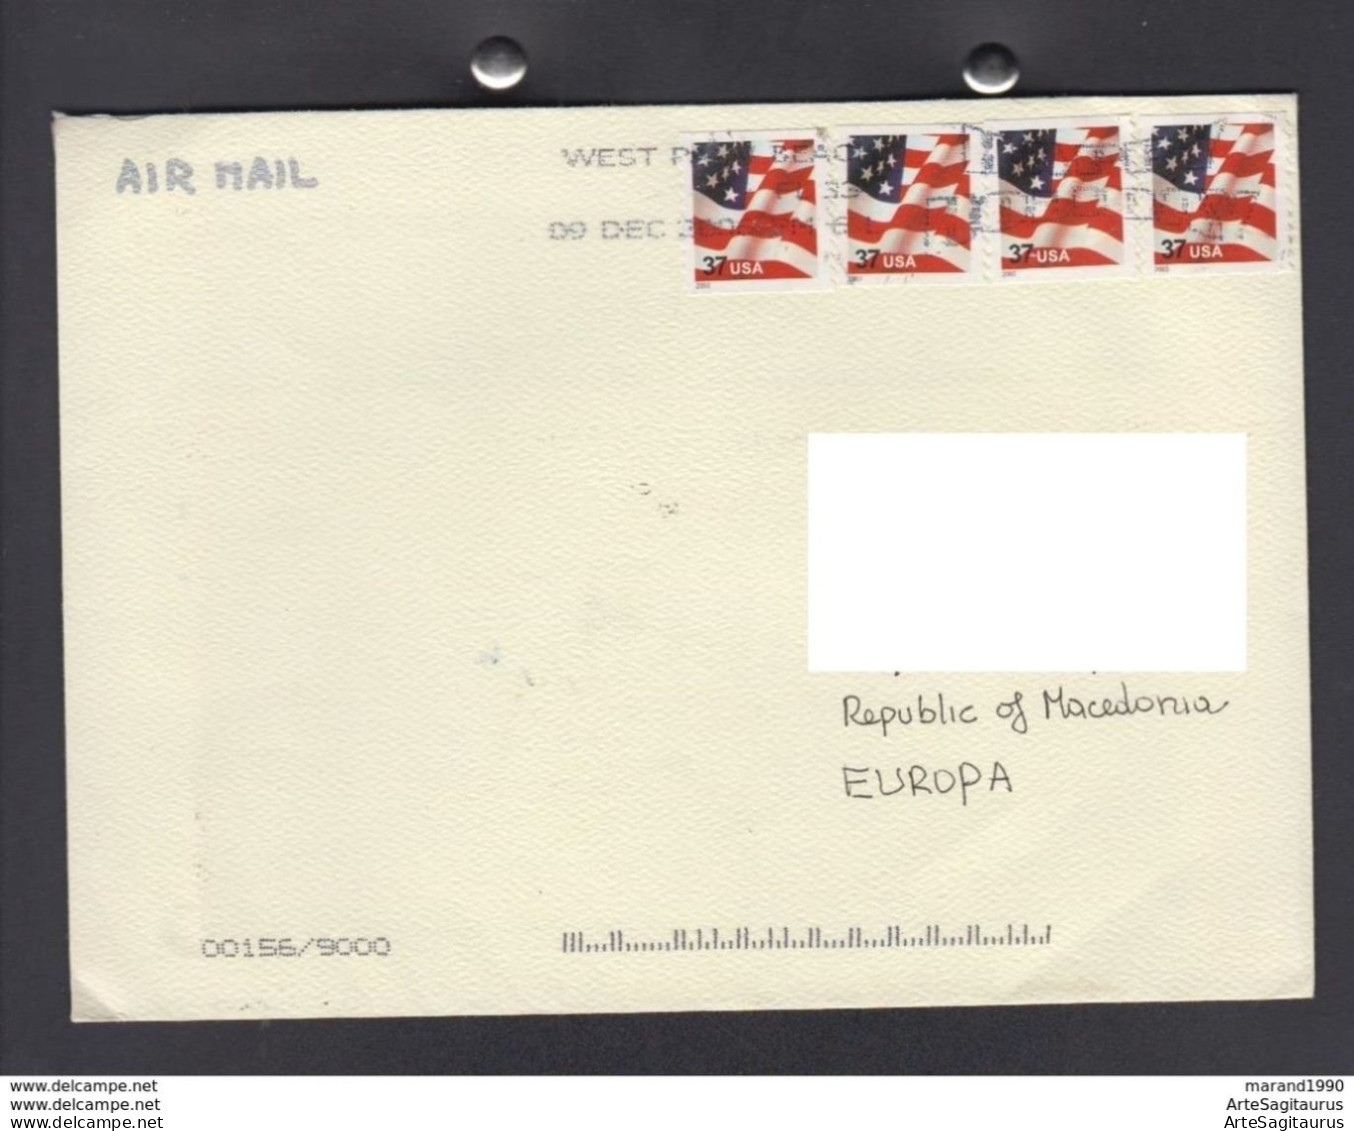 USA, COVER, AIR MAIL, FLAGS, REPUBLIC OF MACEDONIA  (008) - Omslagen